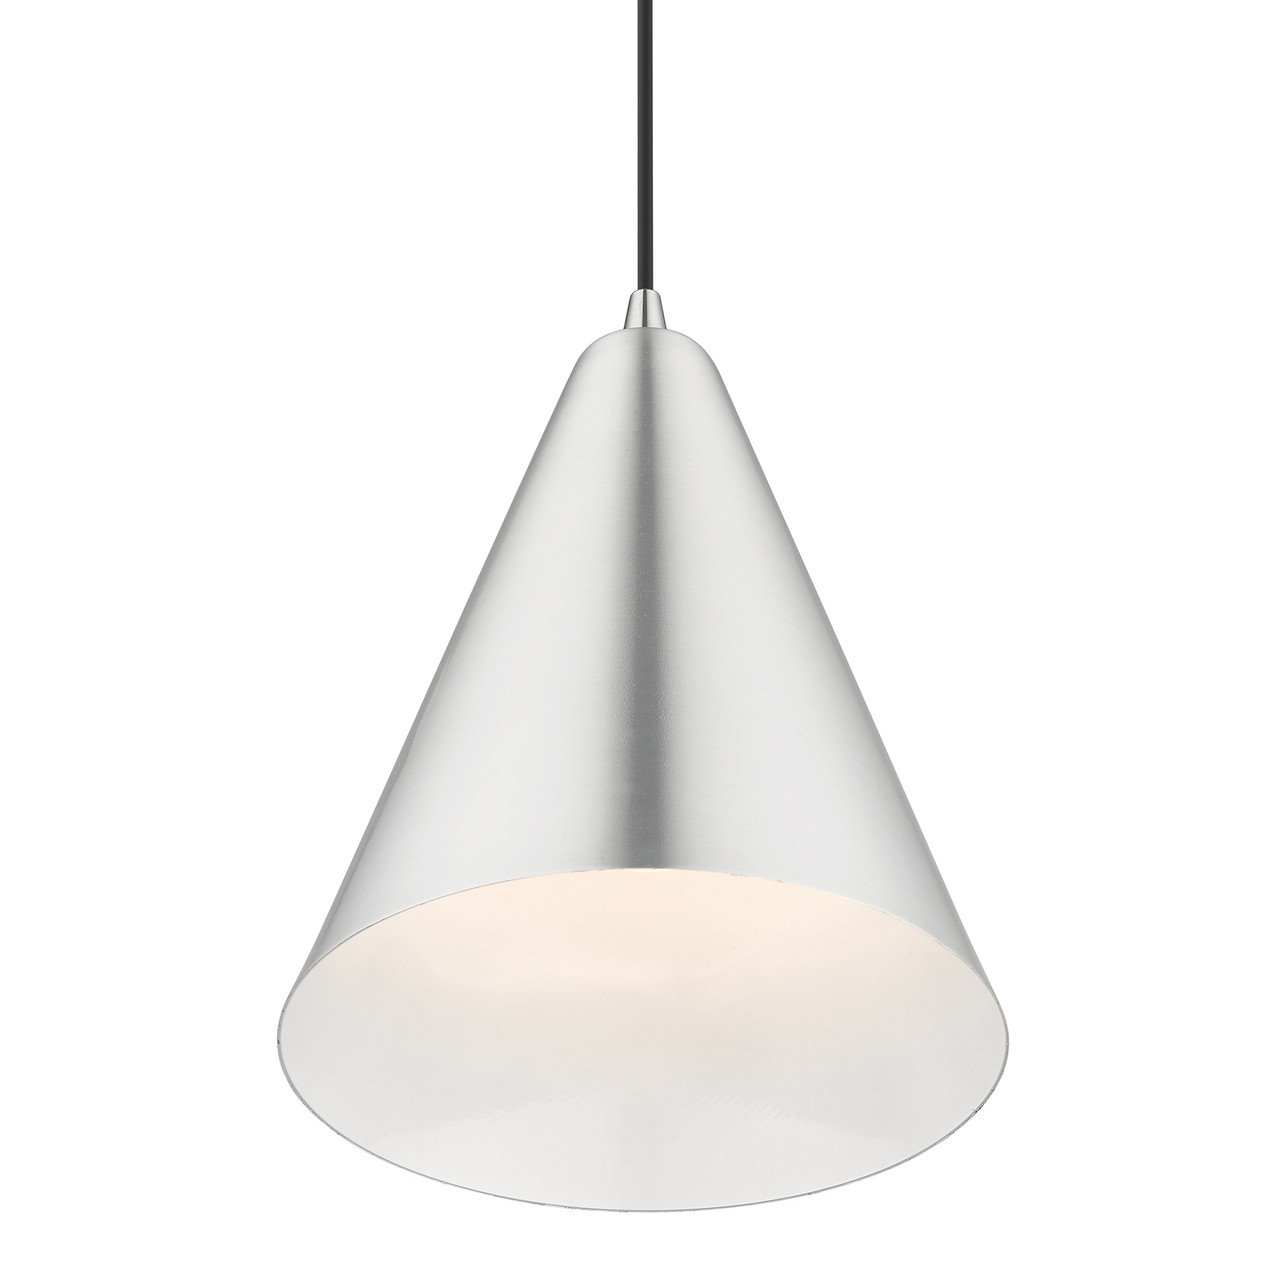 LIVEX LIGHTING 41492-66 1 Light Brushed Aluminum Cone Pendant with Polished Chrome Accents